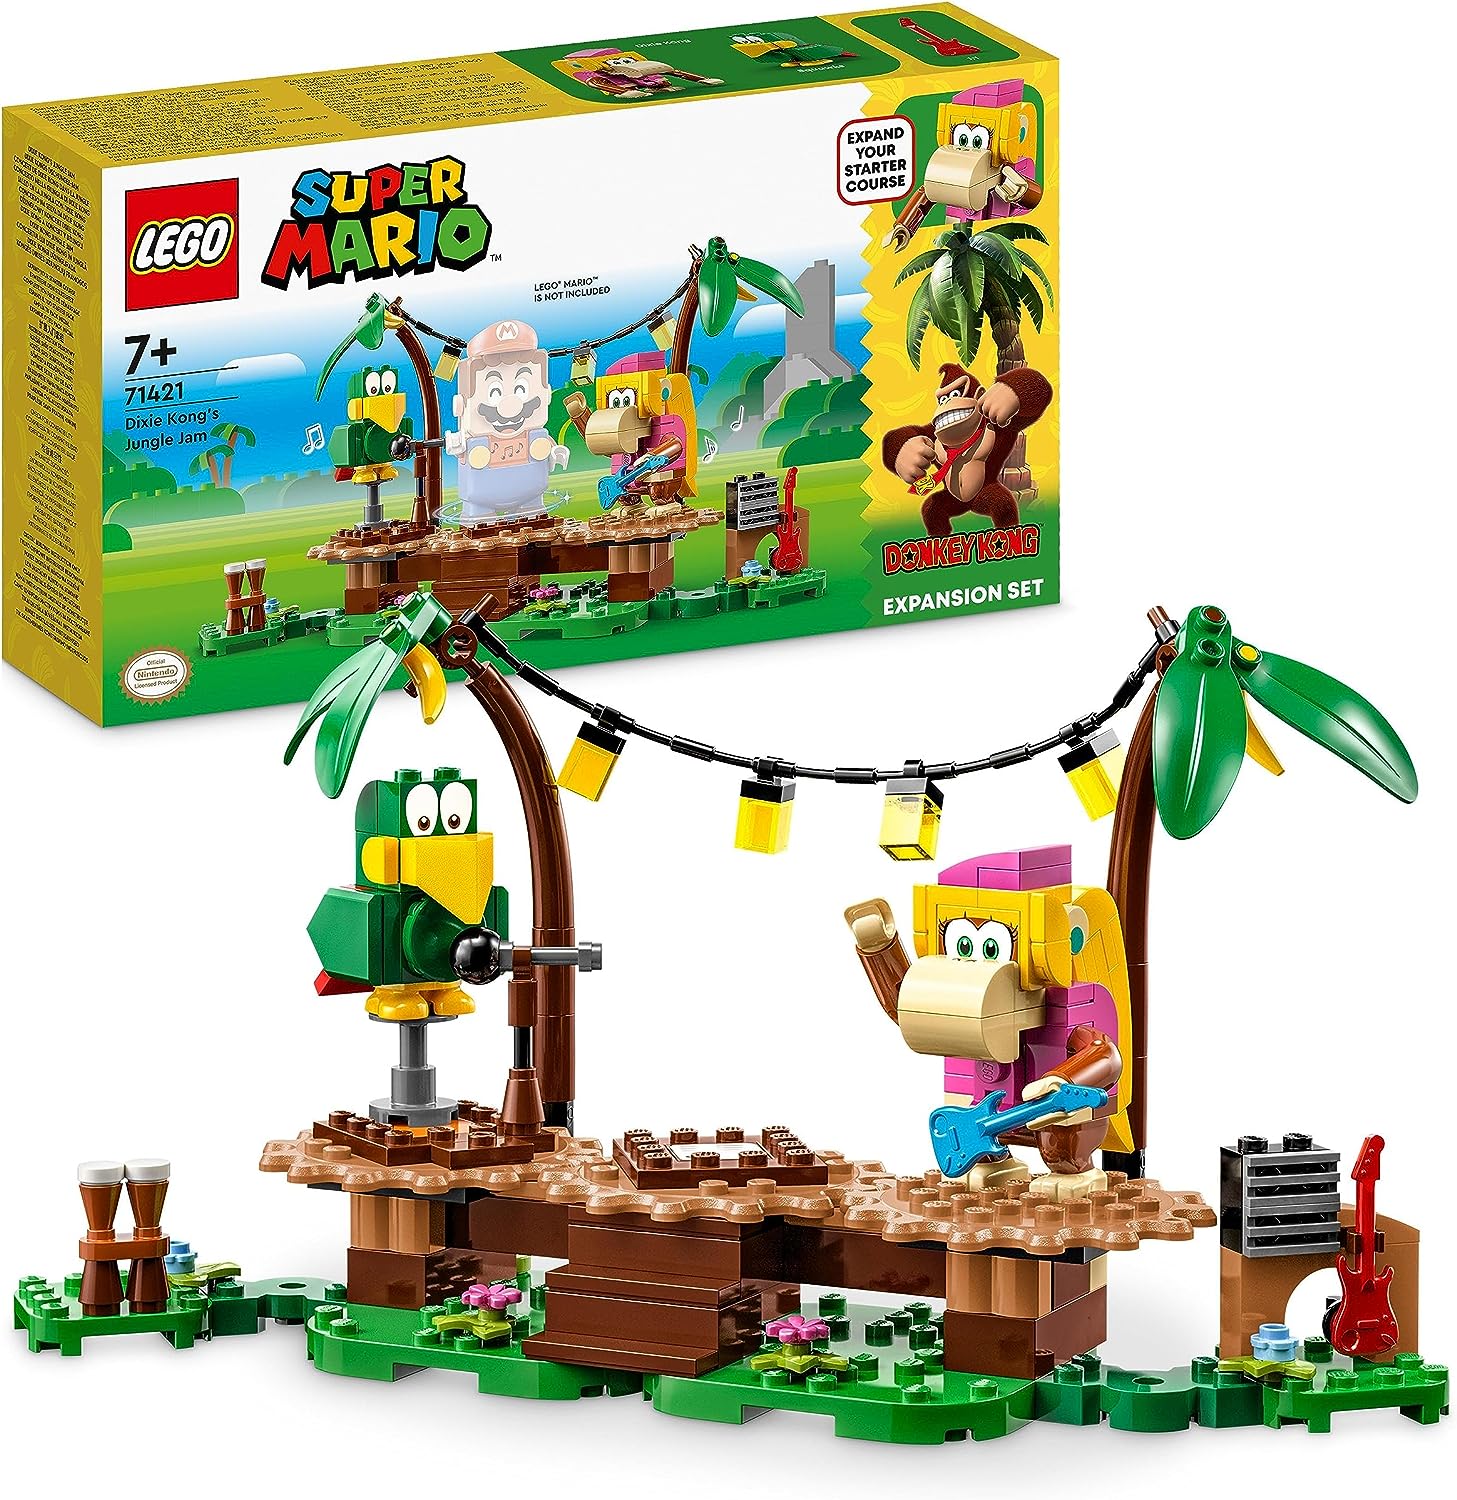 LEGO 71421 Super Mario Dixie Kongs Jungle Jam - Expansion Set with Dixie Kong and Parrot Sqwaks Figures, Toy to Combine with Starter Set